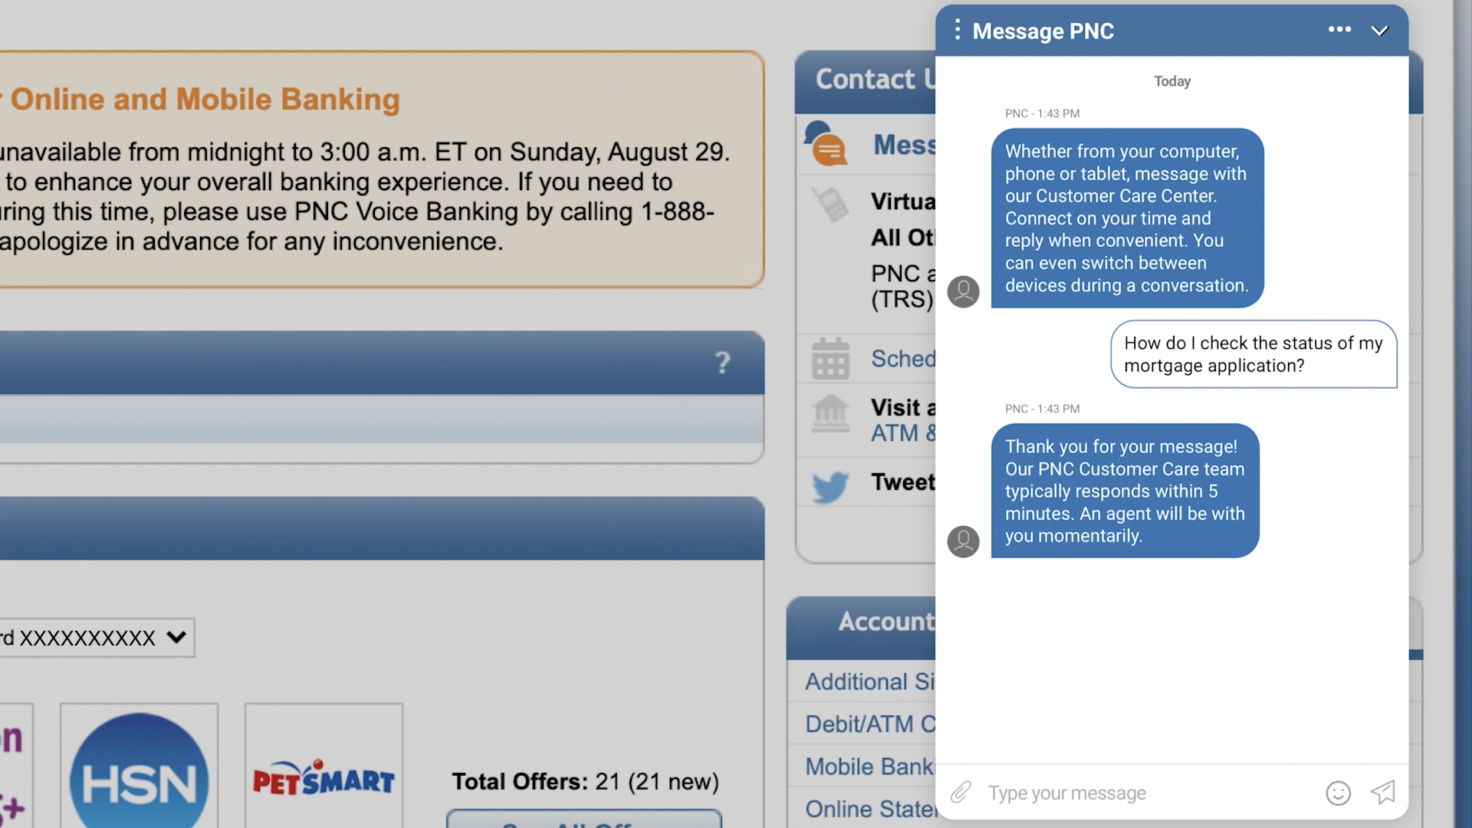 Adapting to customer communication preferences with PNC web messaging